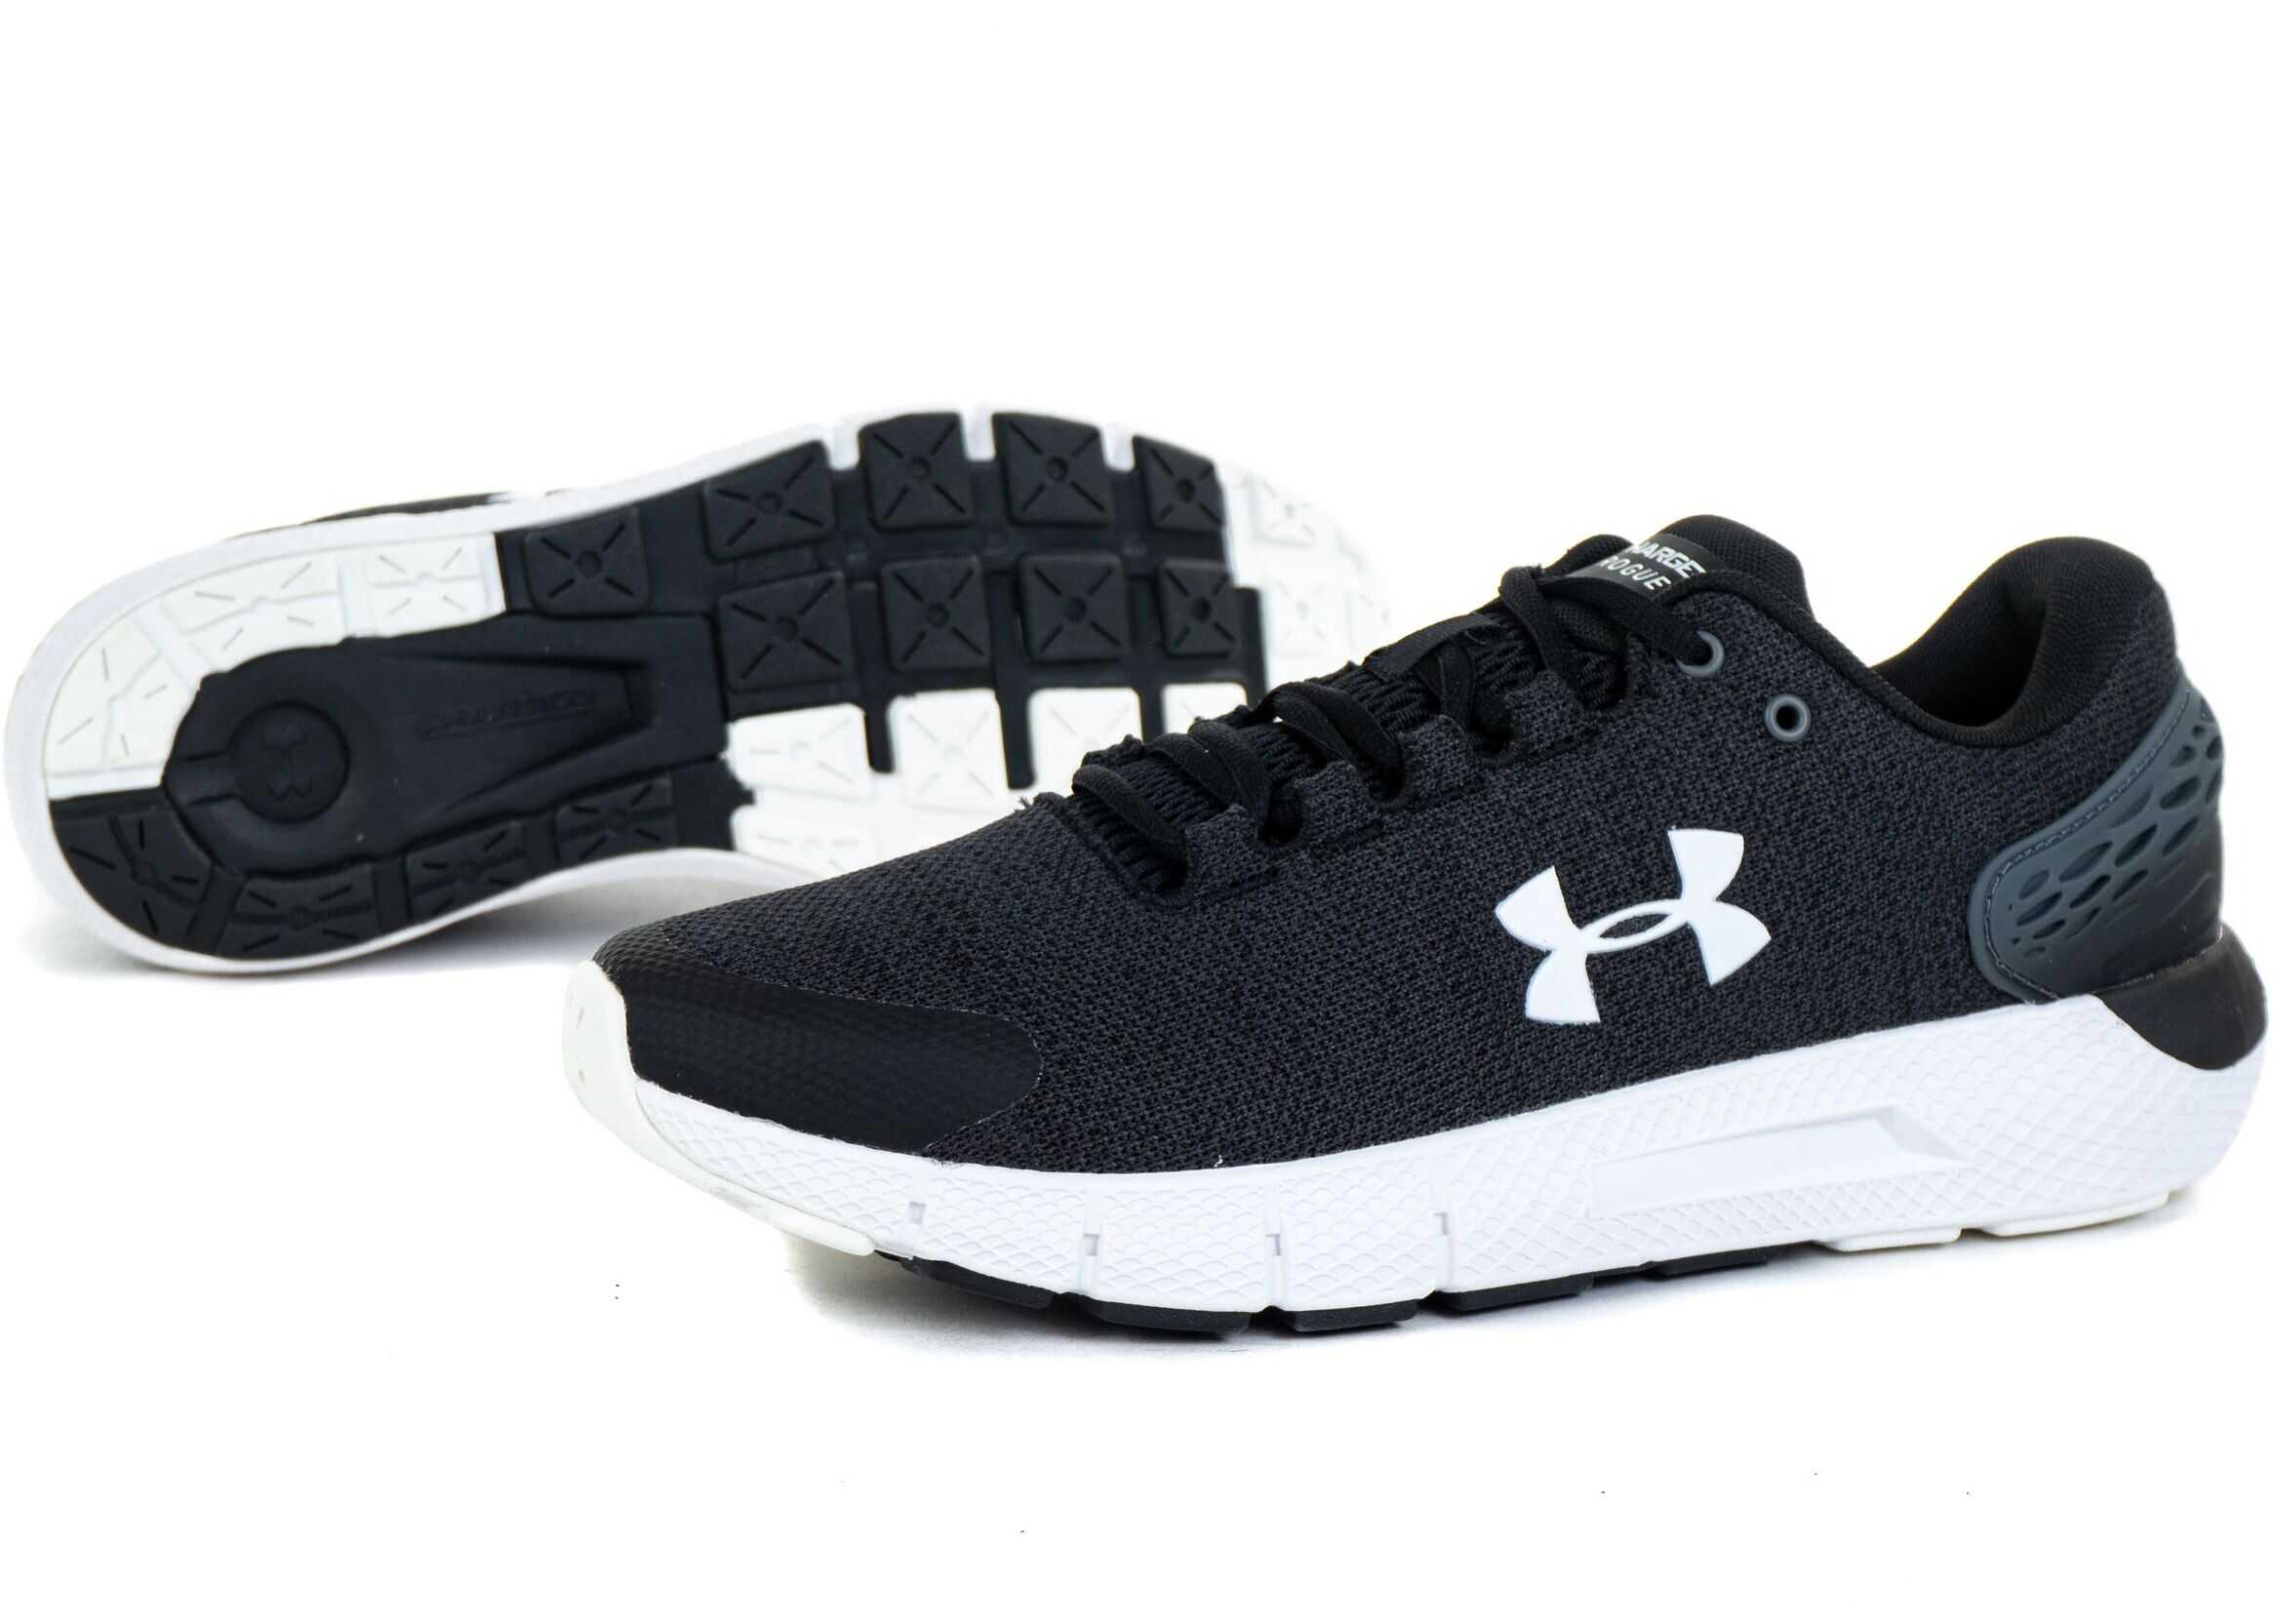 Under Armour Charged Rogue 2 Twist Black